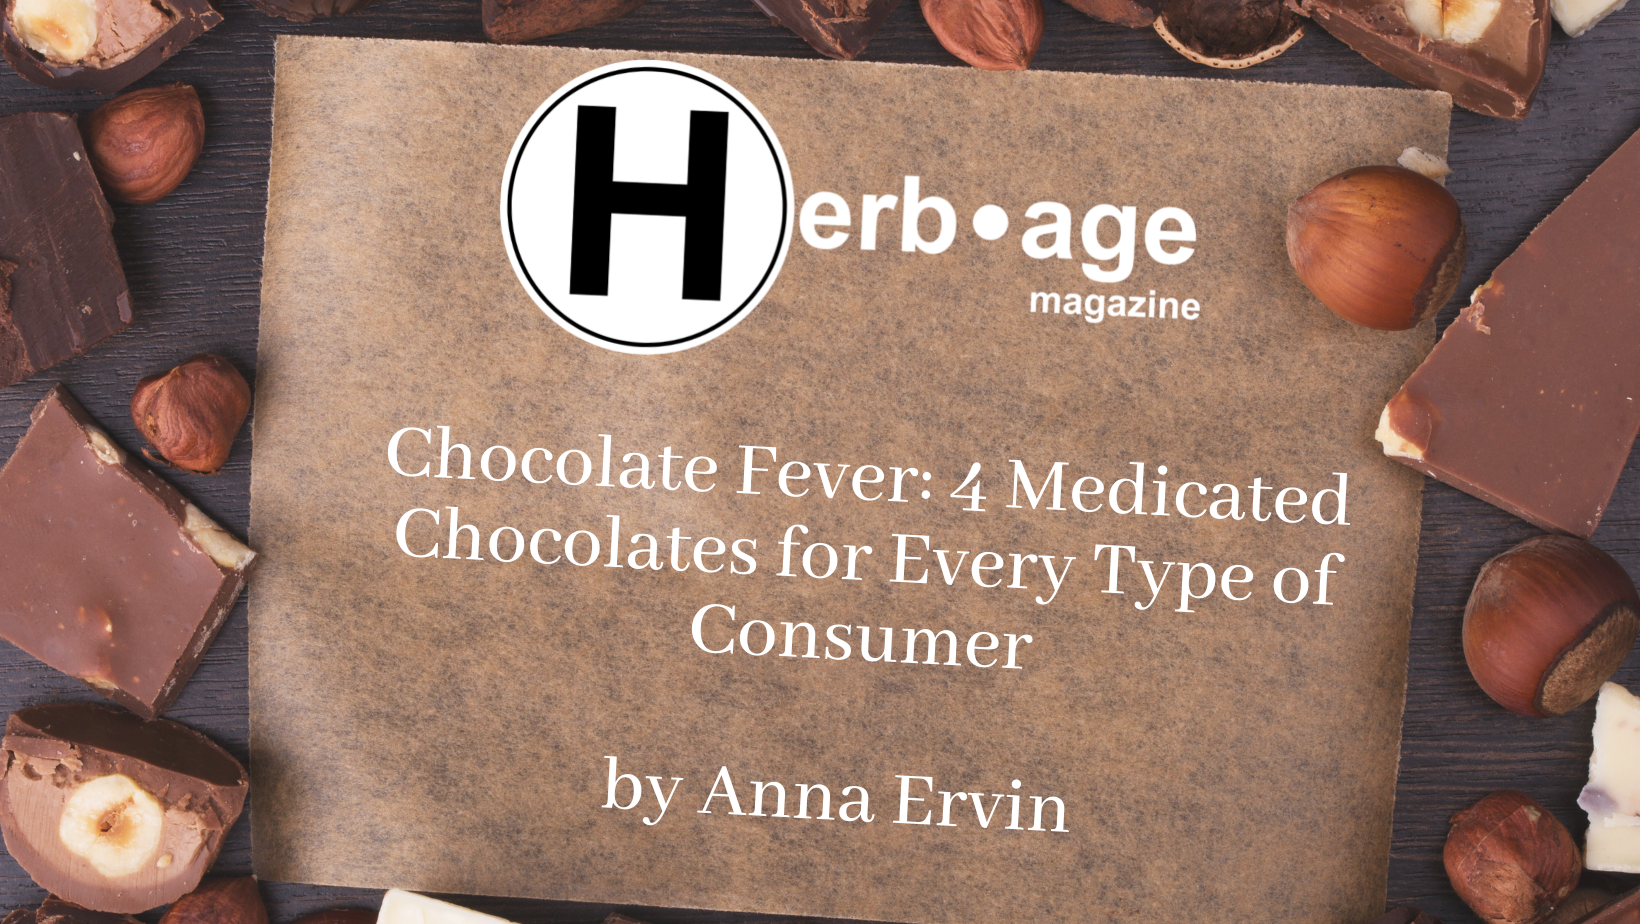 Chocolate Fever: 4 Medicated Chocolates for Every Type of Consumer